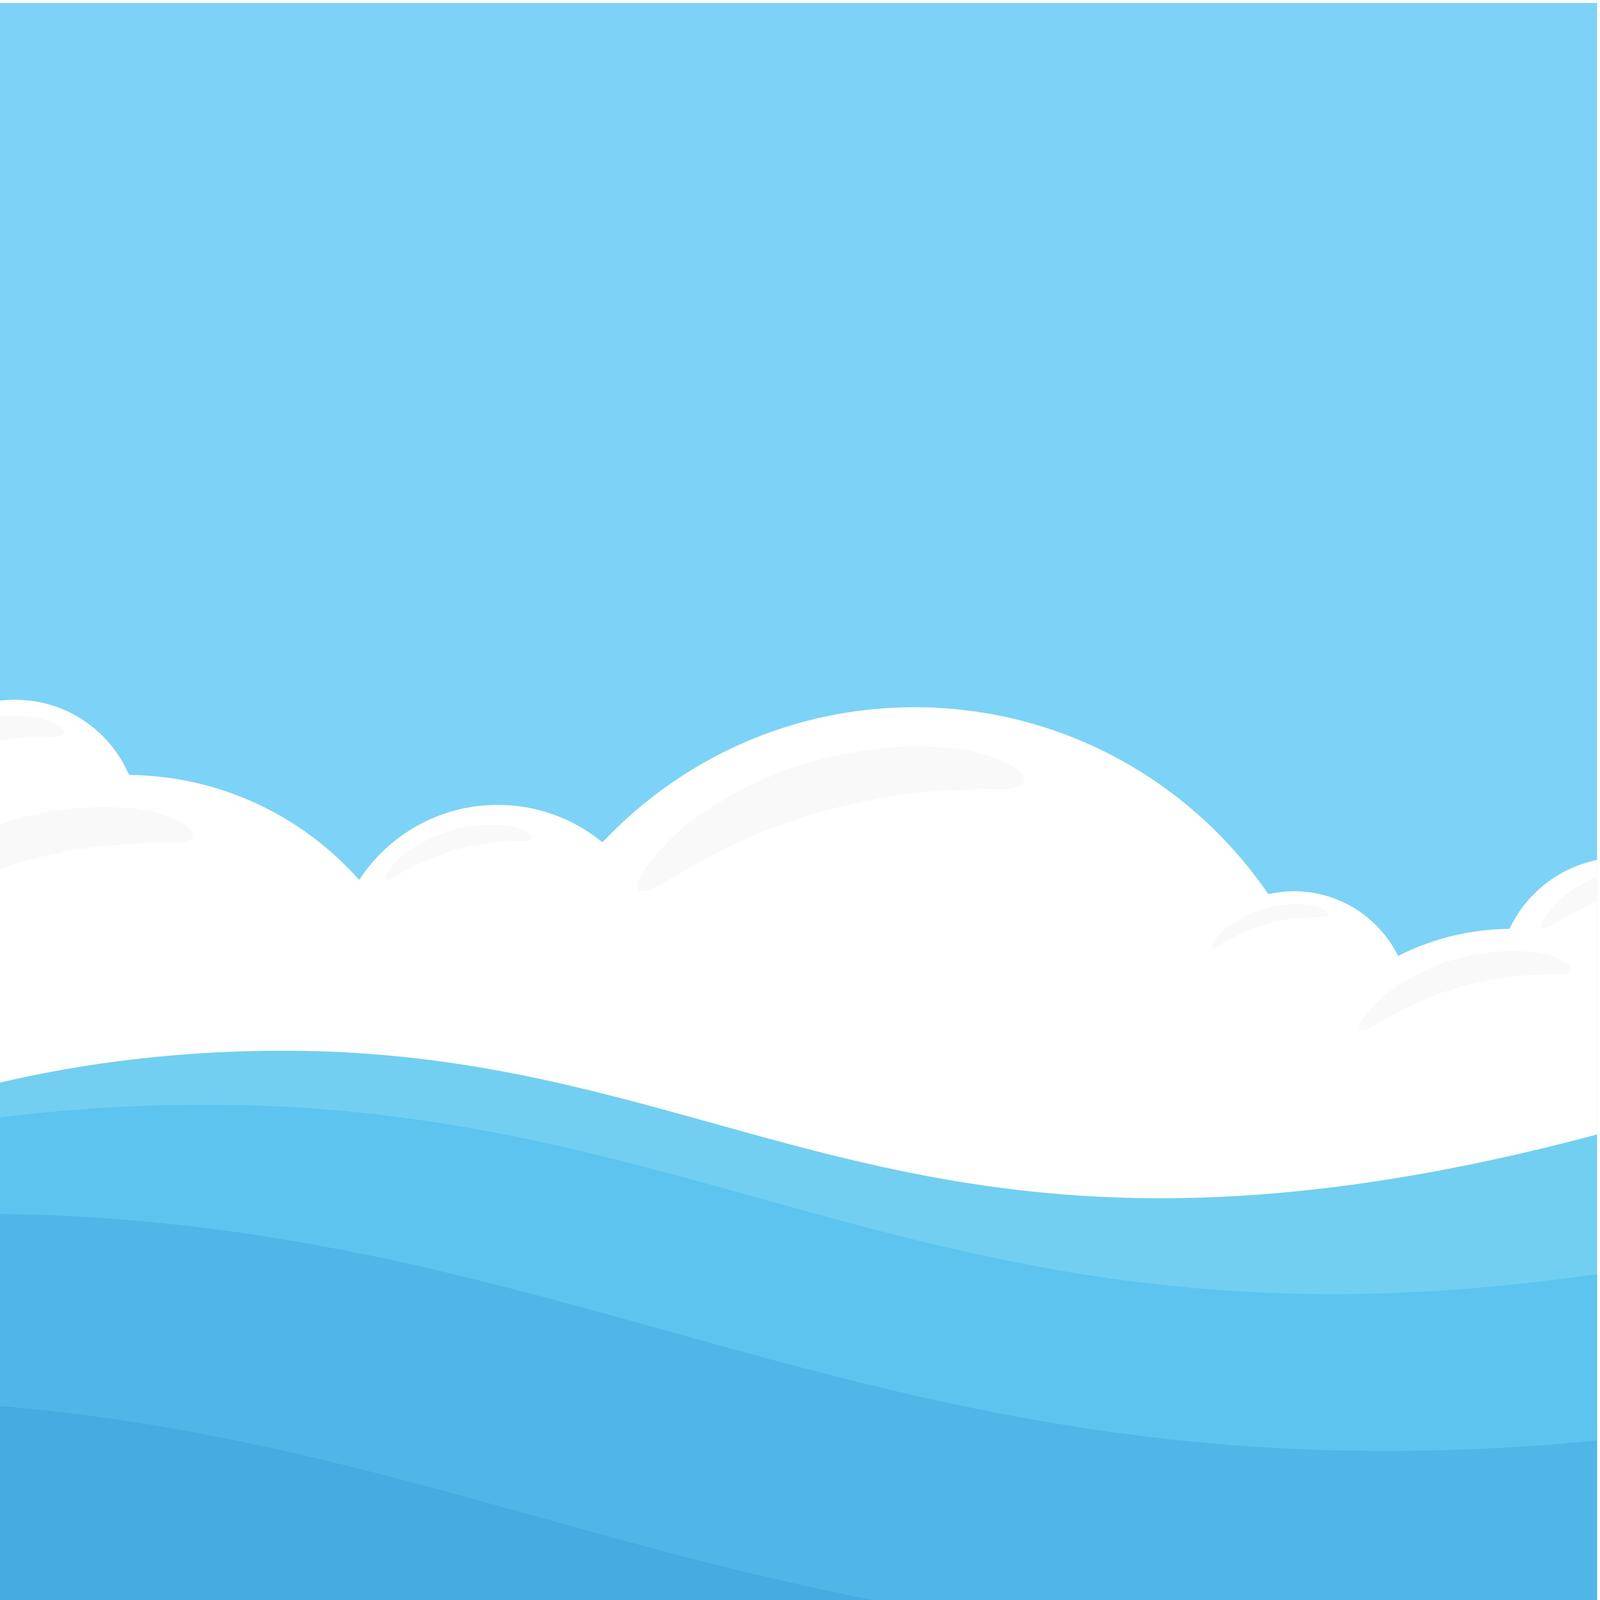 Seascape in Flat style. Simple Beautiful Nature Landscape Illustration of Sea Horizon at Sunny Day.